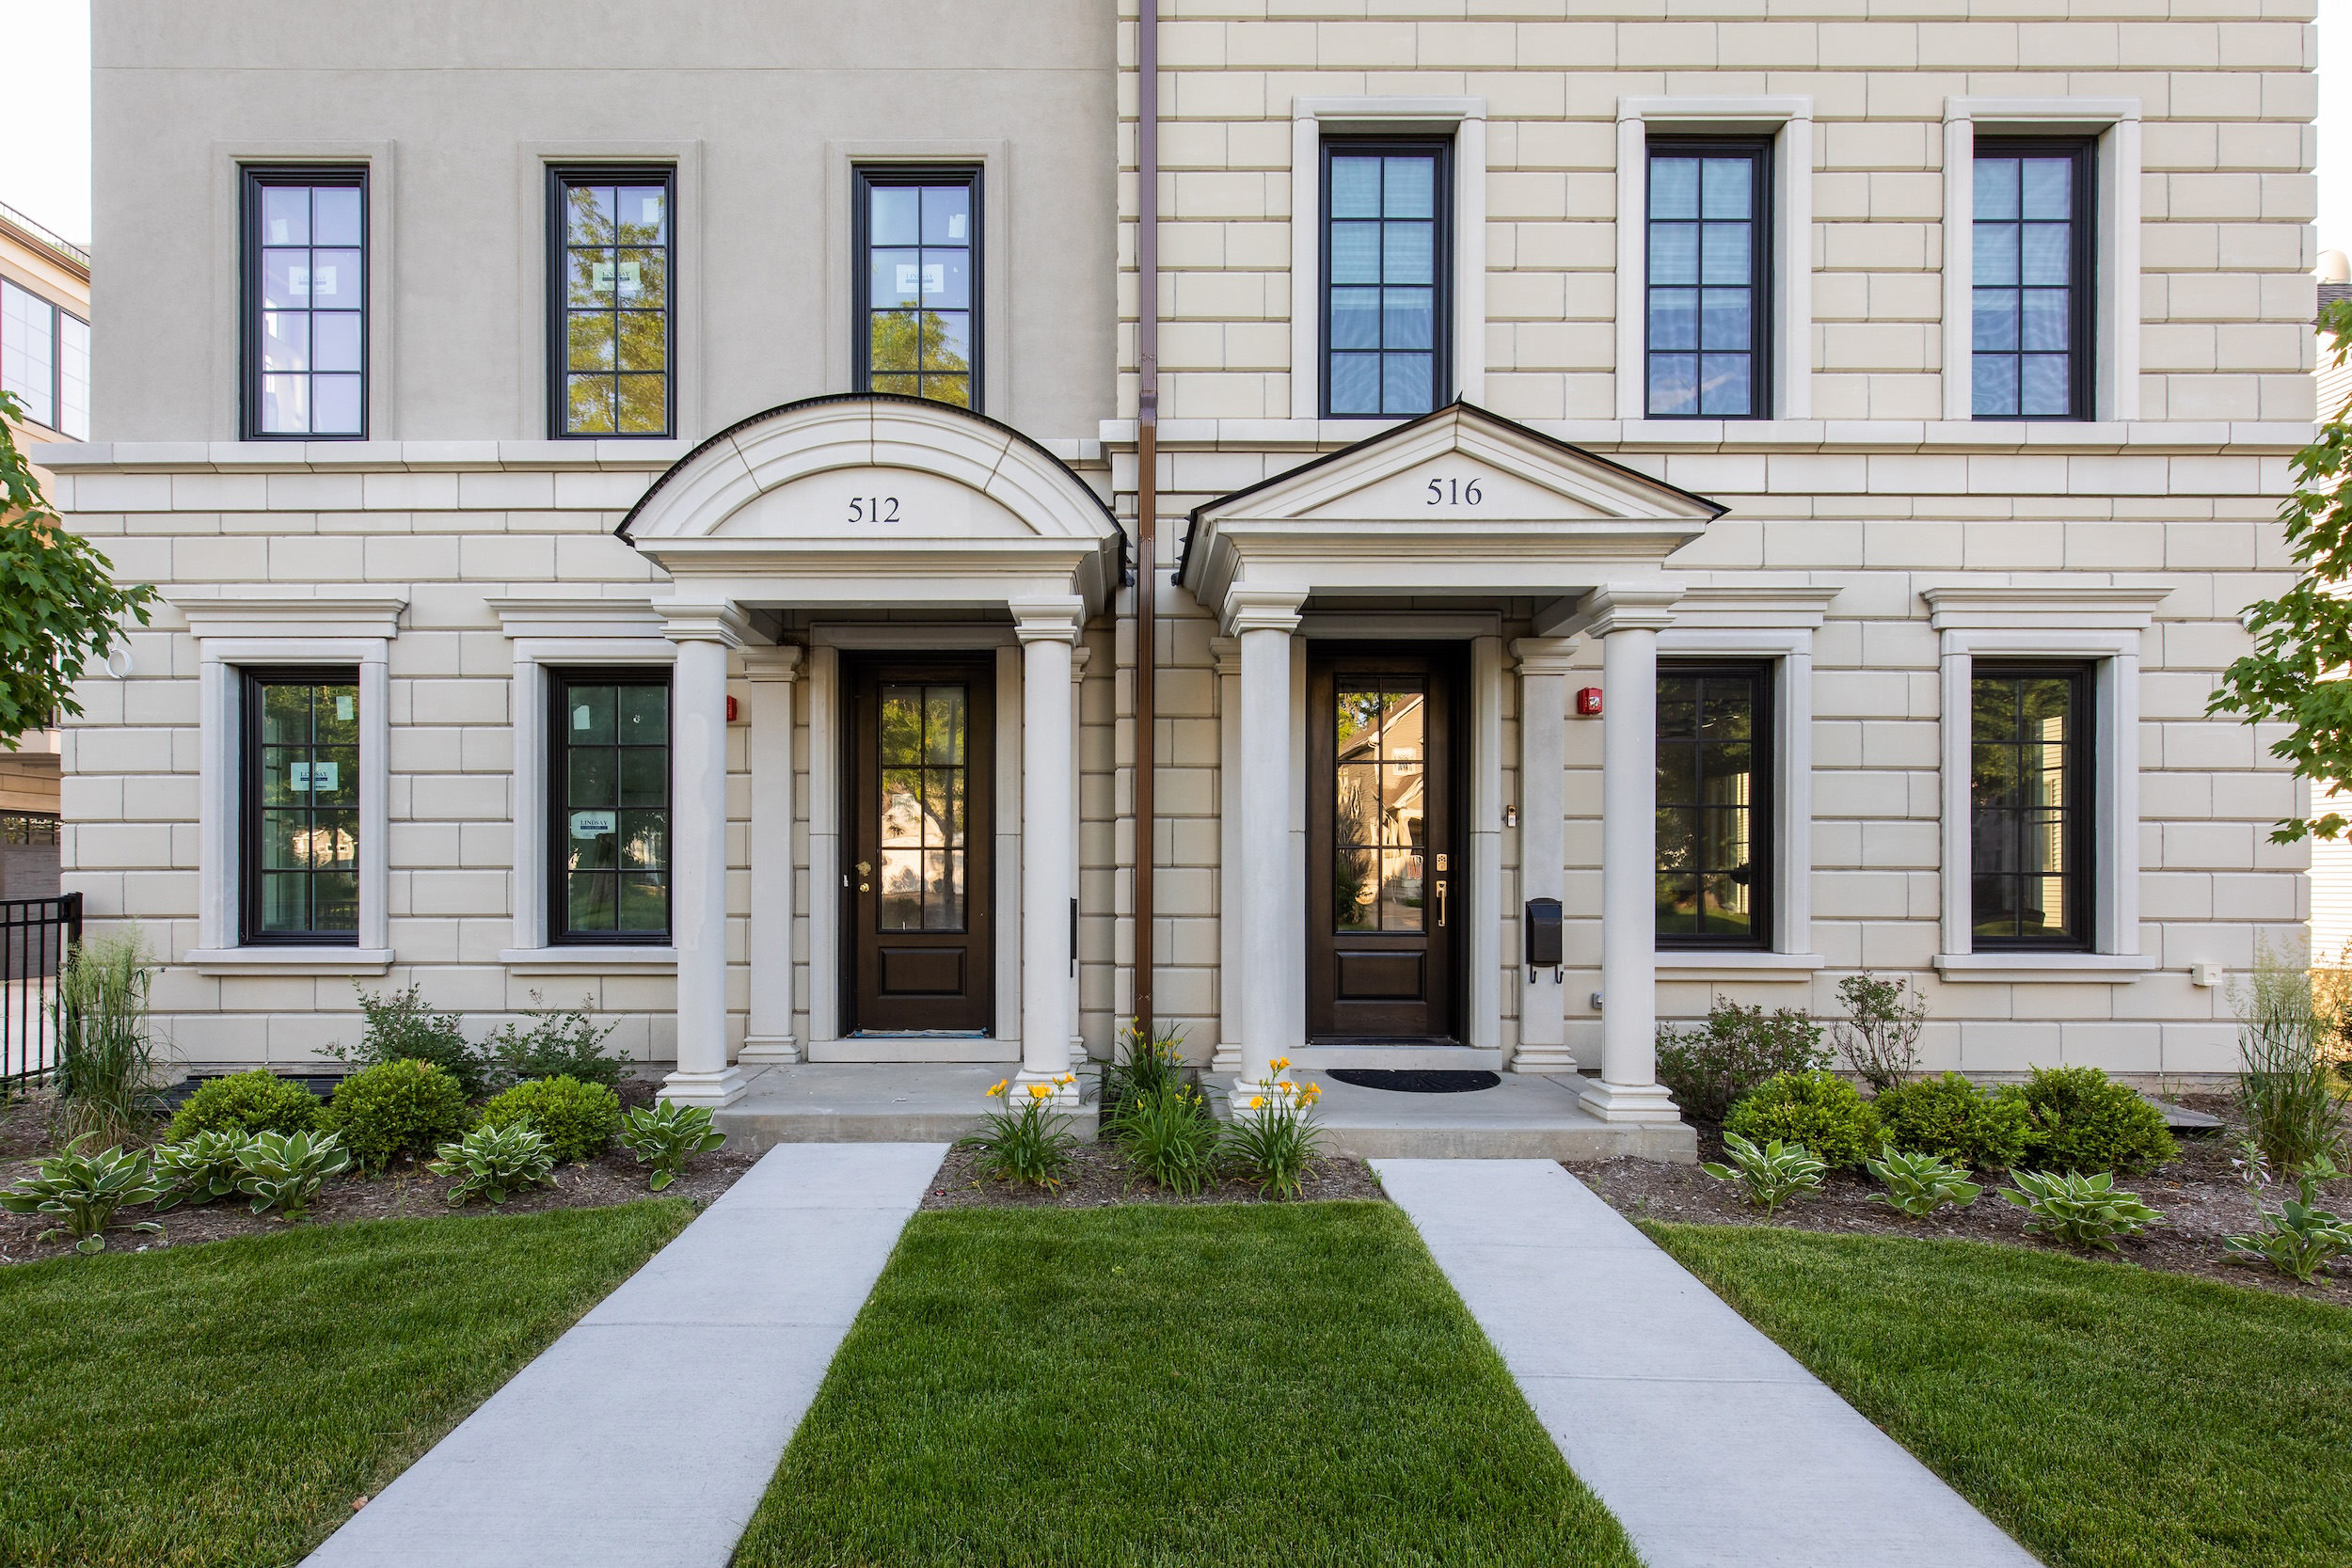 Charleston Row townhouses in Naperville, IL built with Franklin Stone.